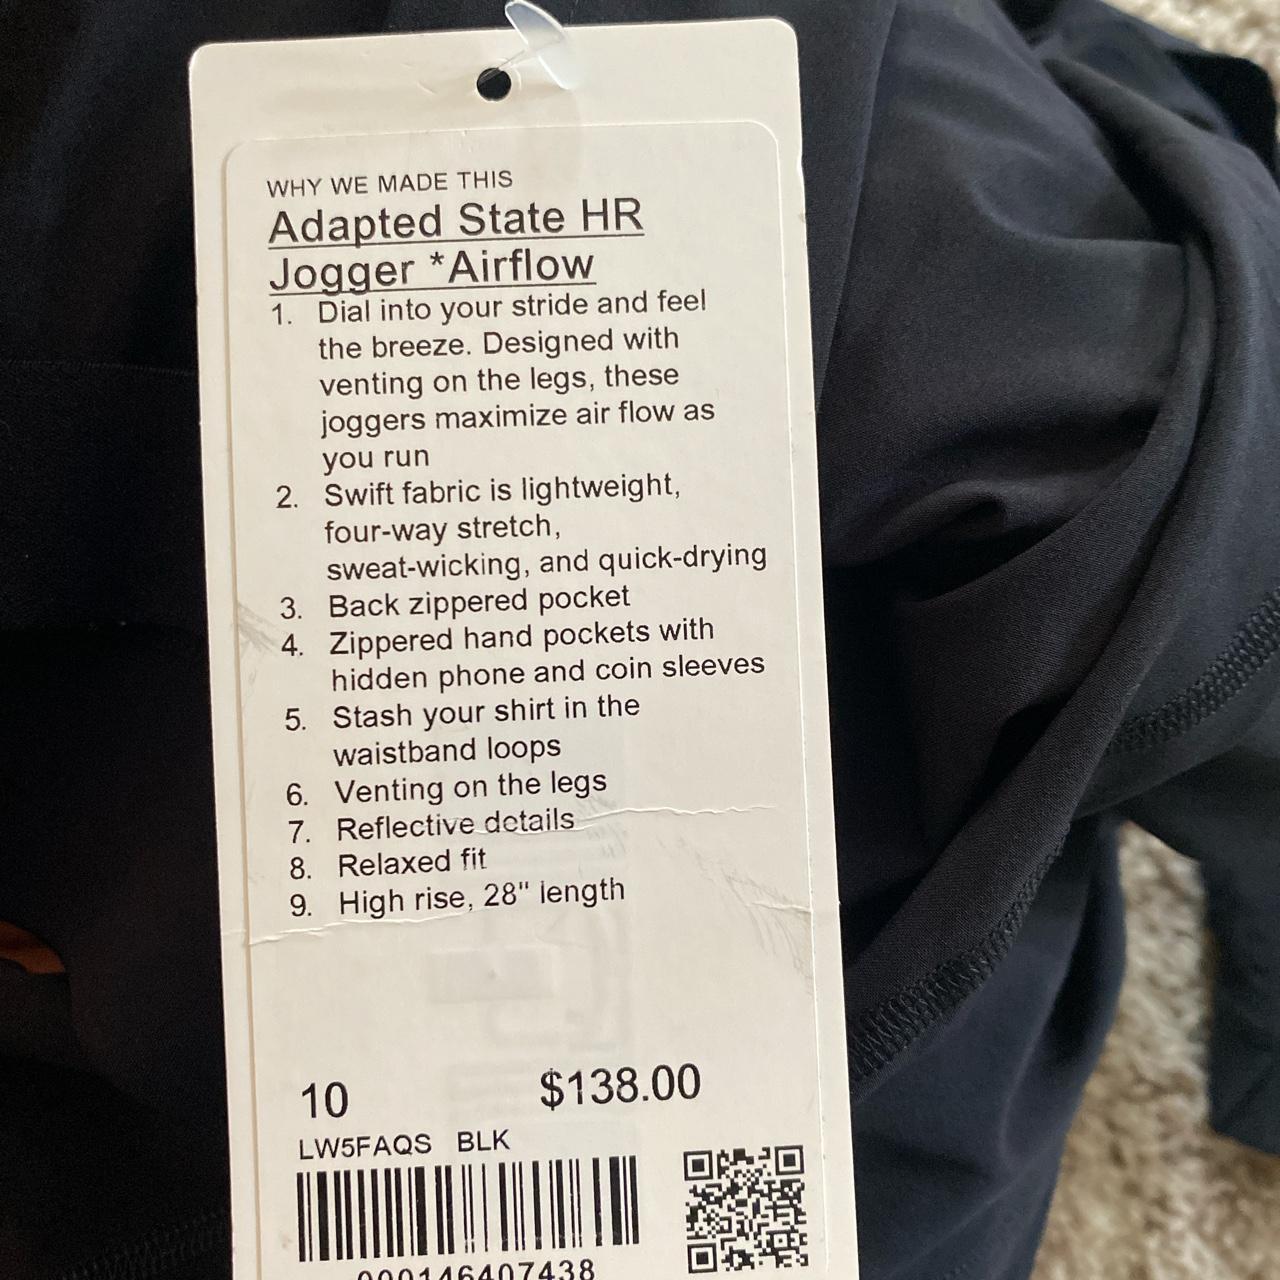 Lululemon Adapted State High-rise Joggers Airflow